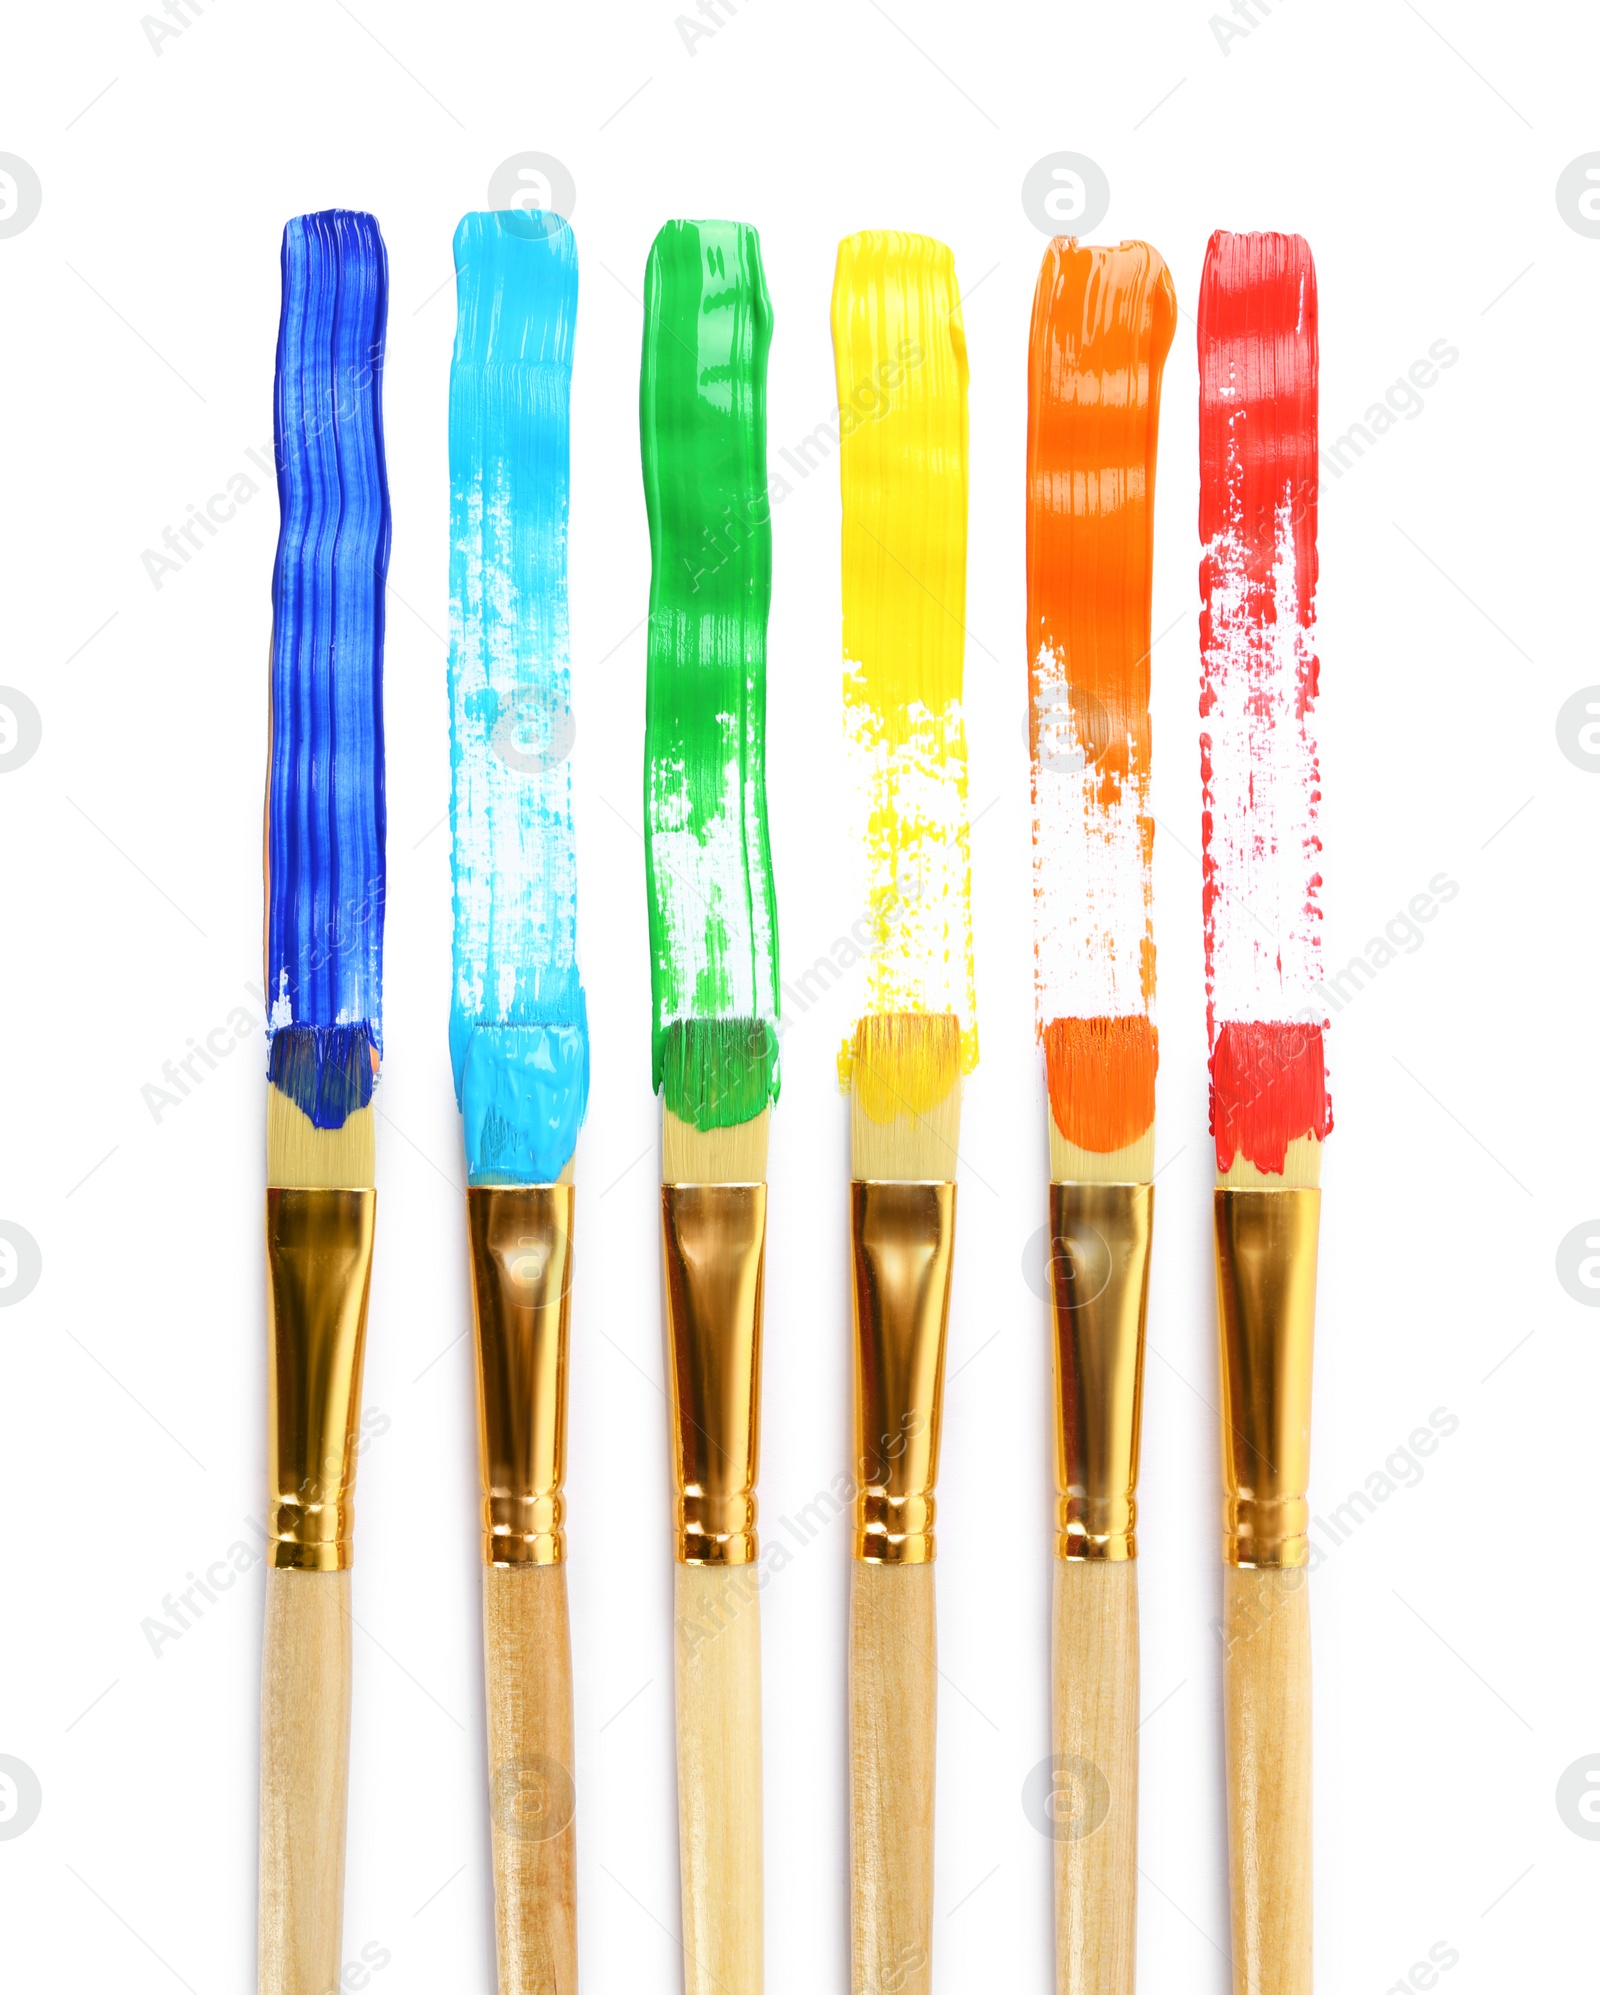 Photo of Brushes with colorful paints and strokes on white background, top view